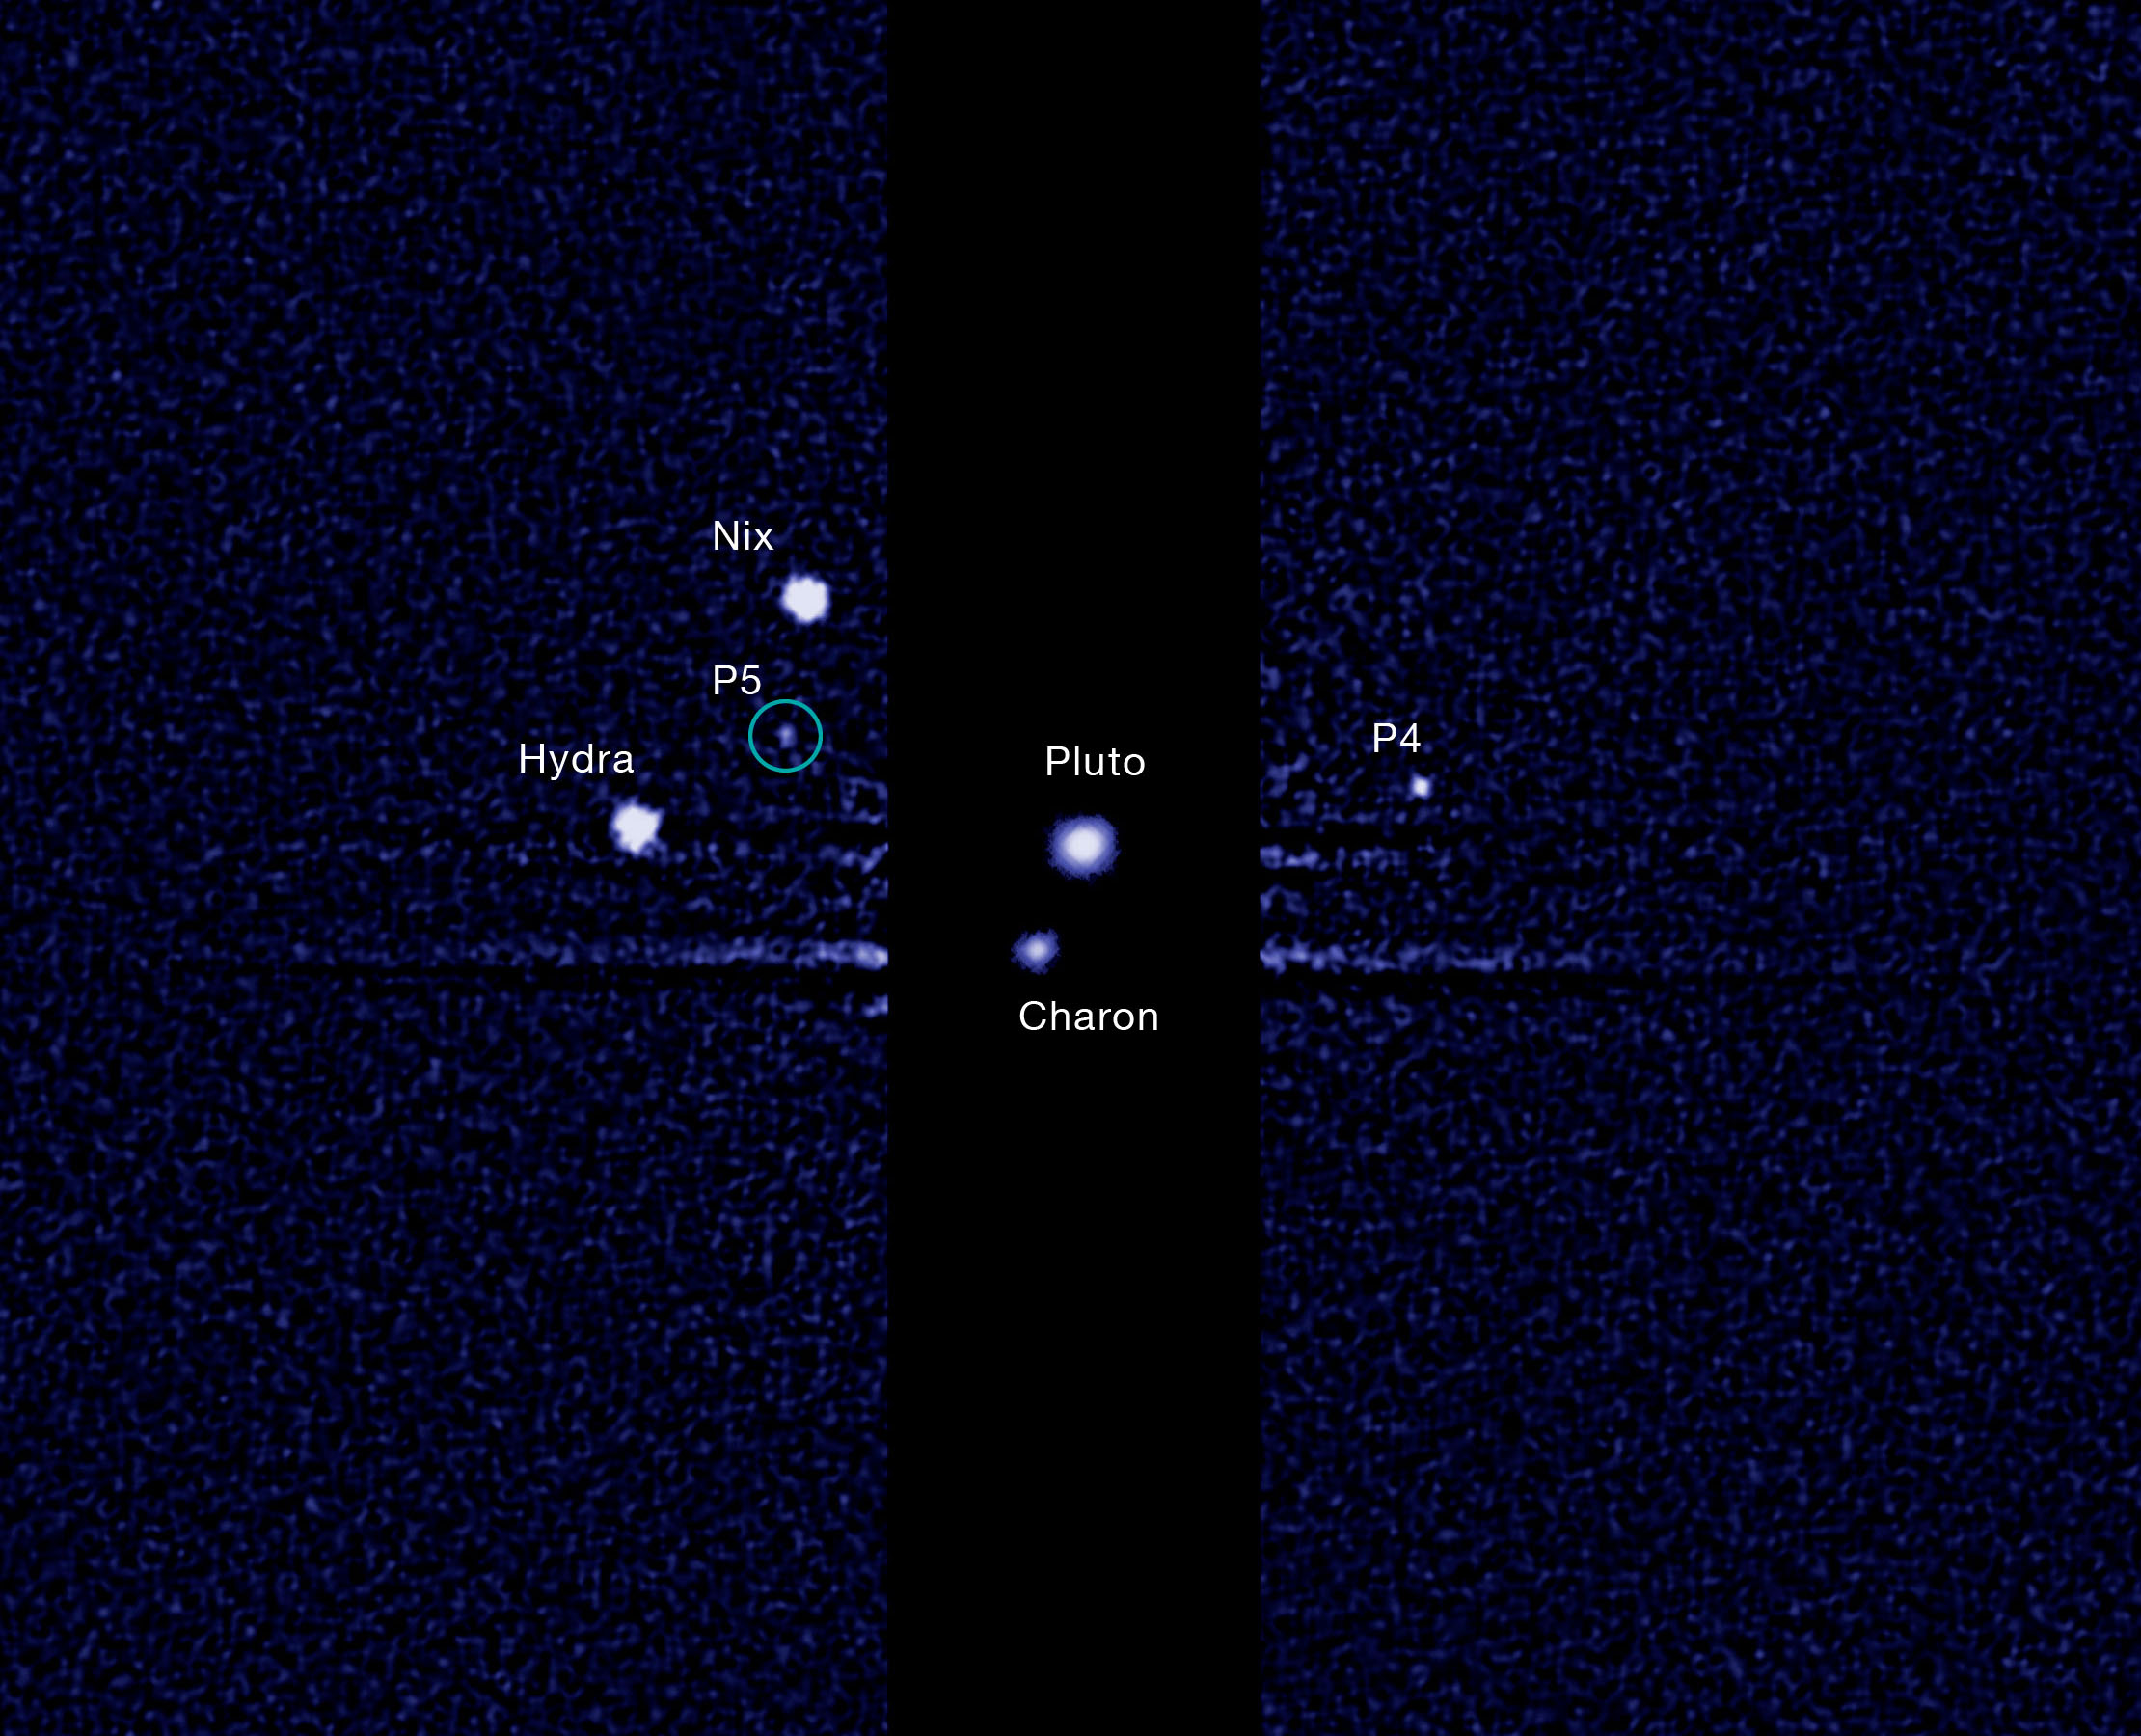 A team of astronomers using the NASA/ESA Hubble Space Telescope has discovered a fifth moon orbiting the icy dwarf planet Pluto. The green circle marks the newly discovered moon, designated S/2012 (134340) 1, or P5, as photographed by Hubble’s Wide Field Camera 3 on 7 July 2012. The moon is estimated to be 10 to 25 kilometres across. The darker stripe in the centre of the image is because the picture is constructed from a long exposure designed to capture the comparatively faint satellites of Nix, Hydra, P4 and S/2012 (134340) 1, and a shorter exposure to capture Pluto and Charon, which are much brighter. Credit: NASA, ESA, and M. Showalter (SETI Institute)